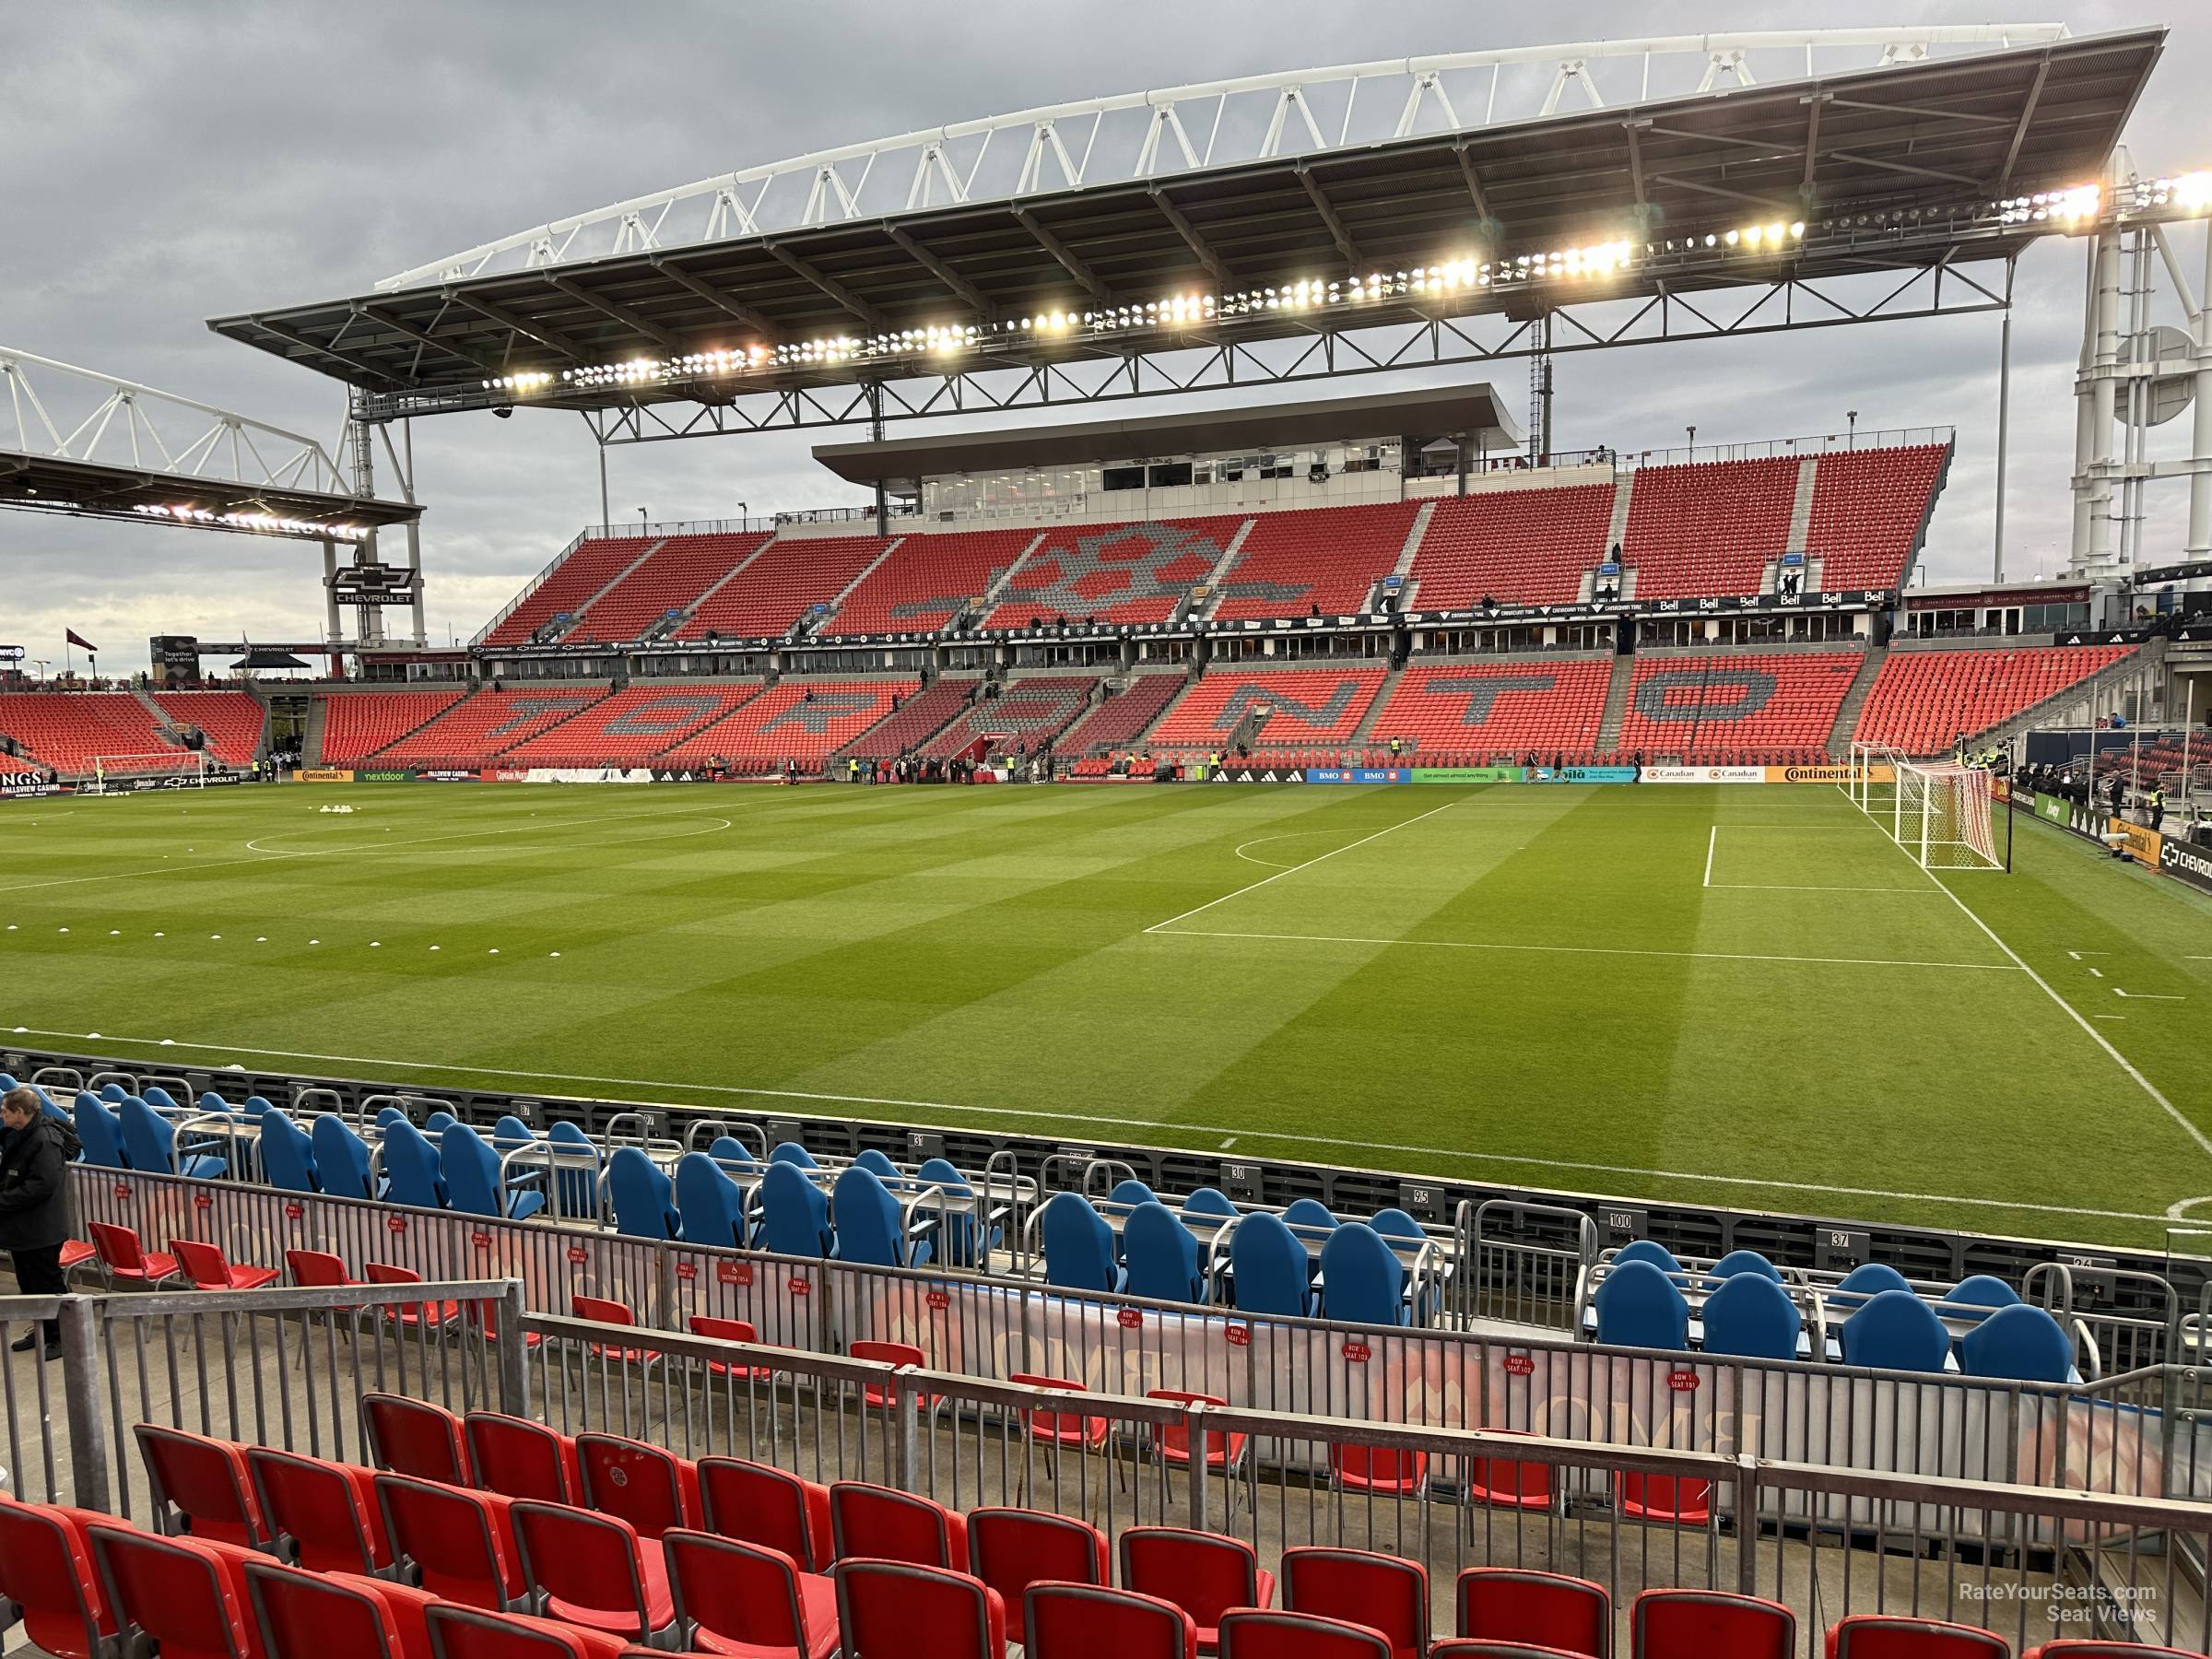 section 105, row 10 seat view  - bmo field